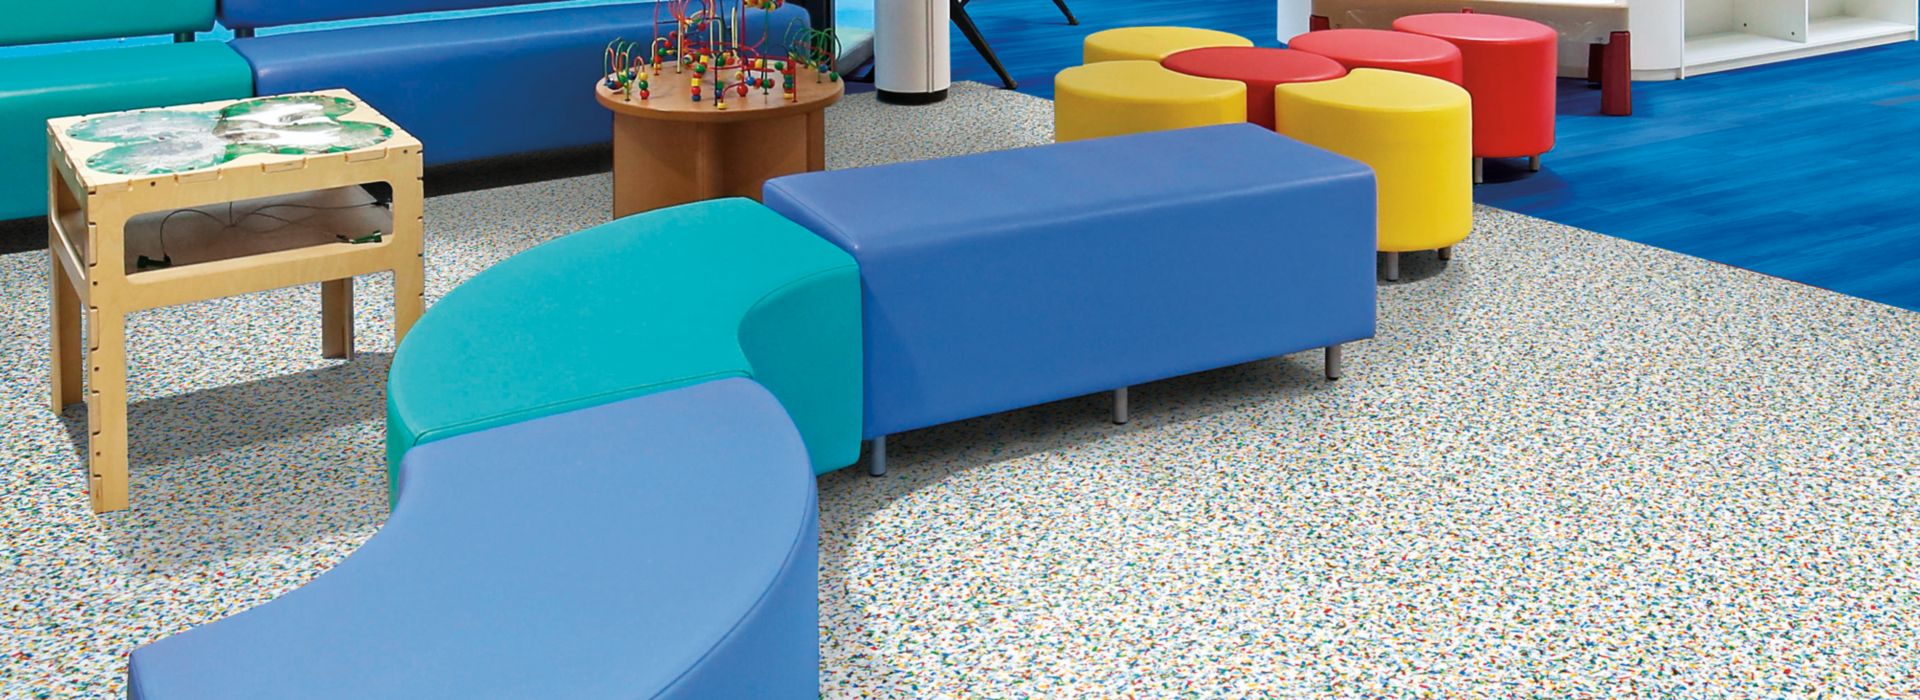 Interface Walk on By and Studio Set LVT in children's waiting area with colorful furniture